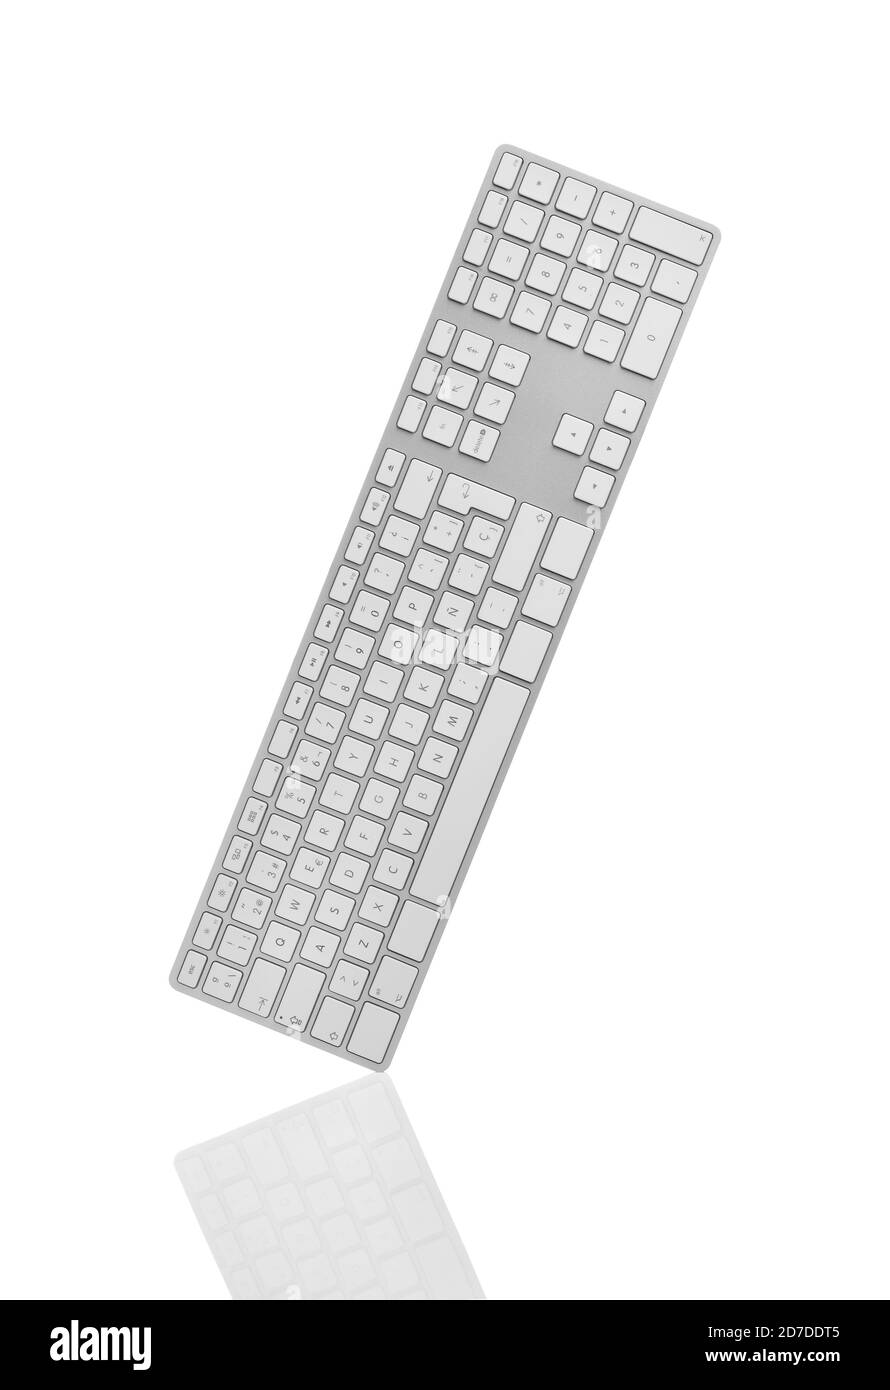 Keyboard upright in a graceful balance with a soft reflection against white background. Clipping path on keyboard. Stock Photo